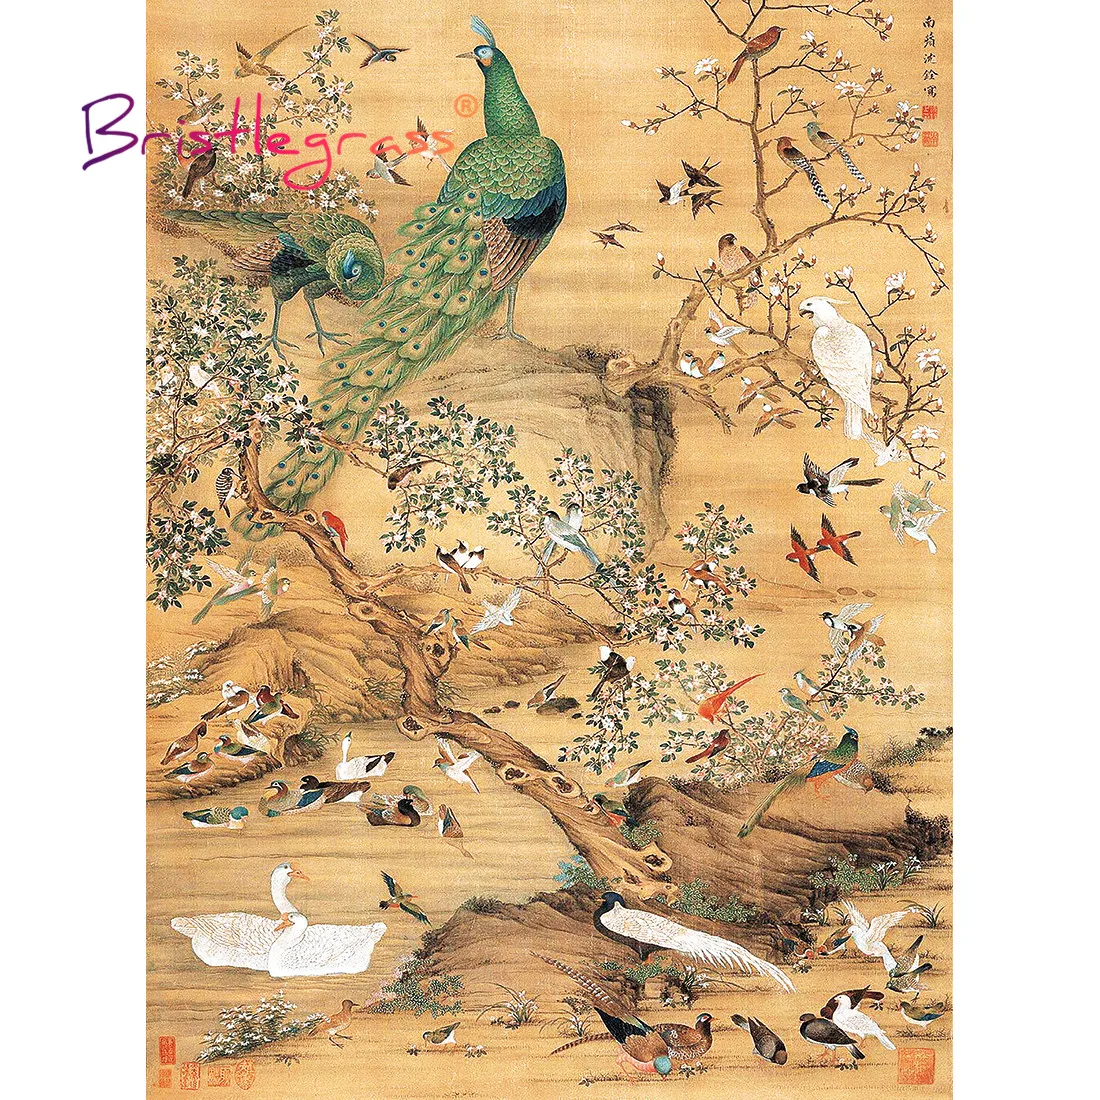 BRISTLEGRASS Wooden Jigsaw Puzzle 500 Piece Peacock Bird Goose Duck Chinese Painting Art Educational Toy Collectibles Home Decor fancy pretty peacock jigsaw puzzle baby wooden baby toy personalize puzzle